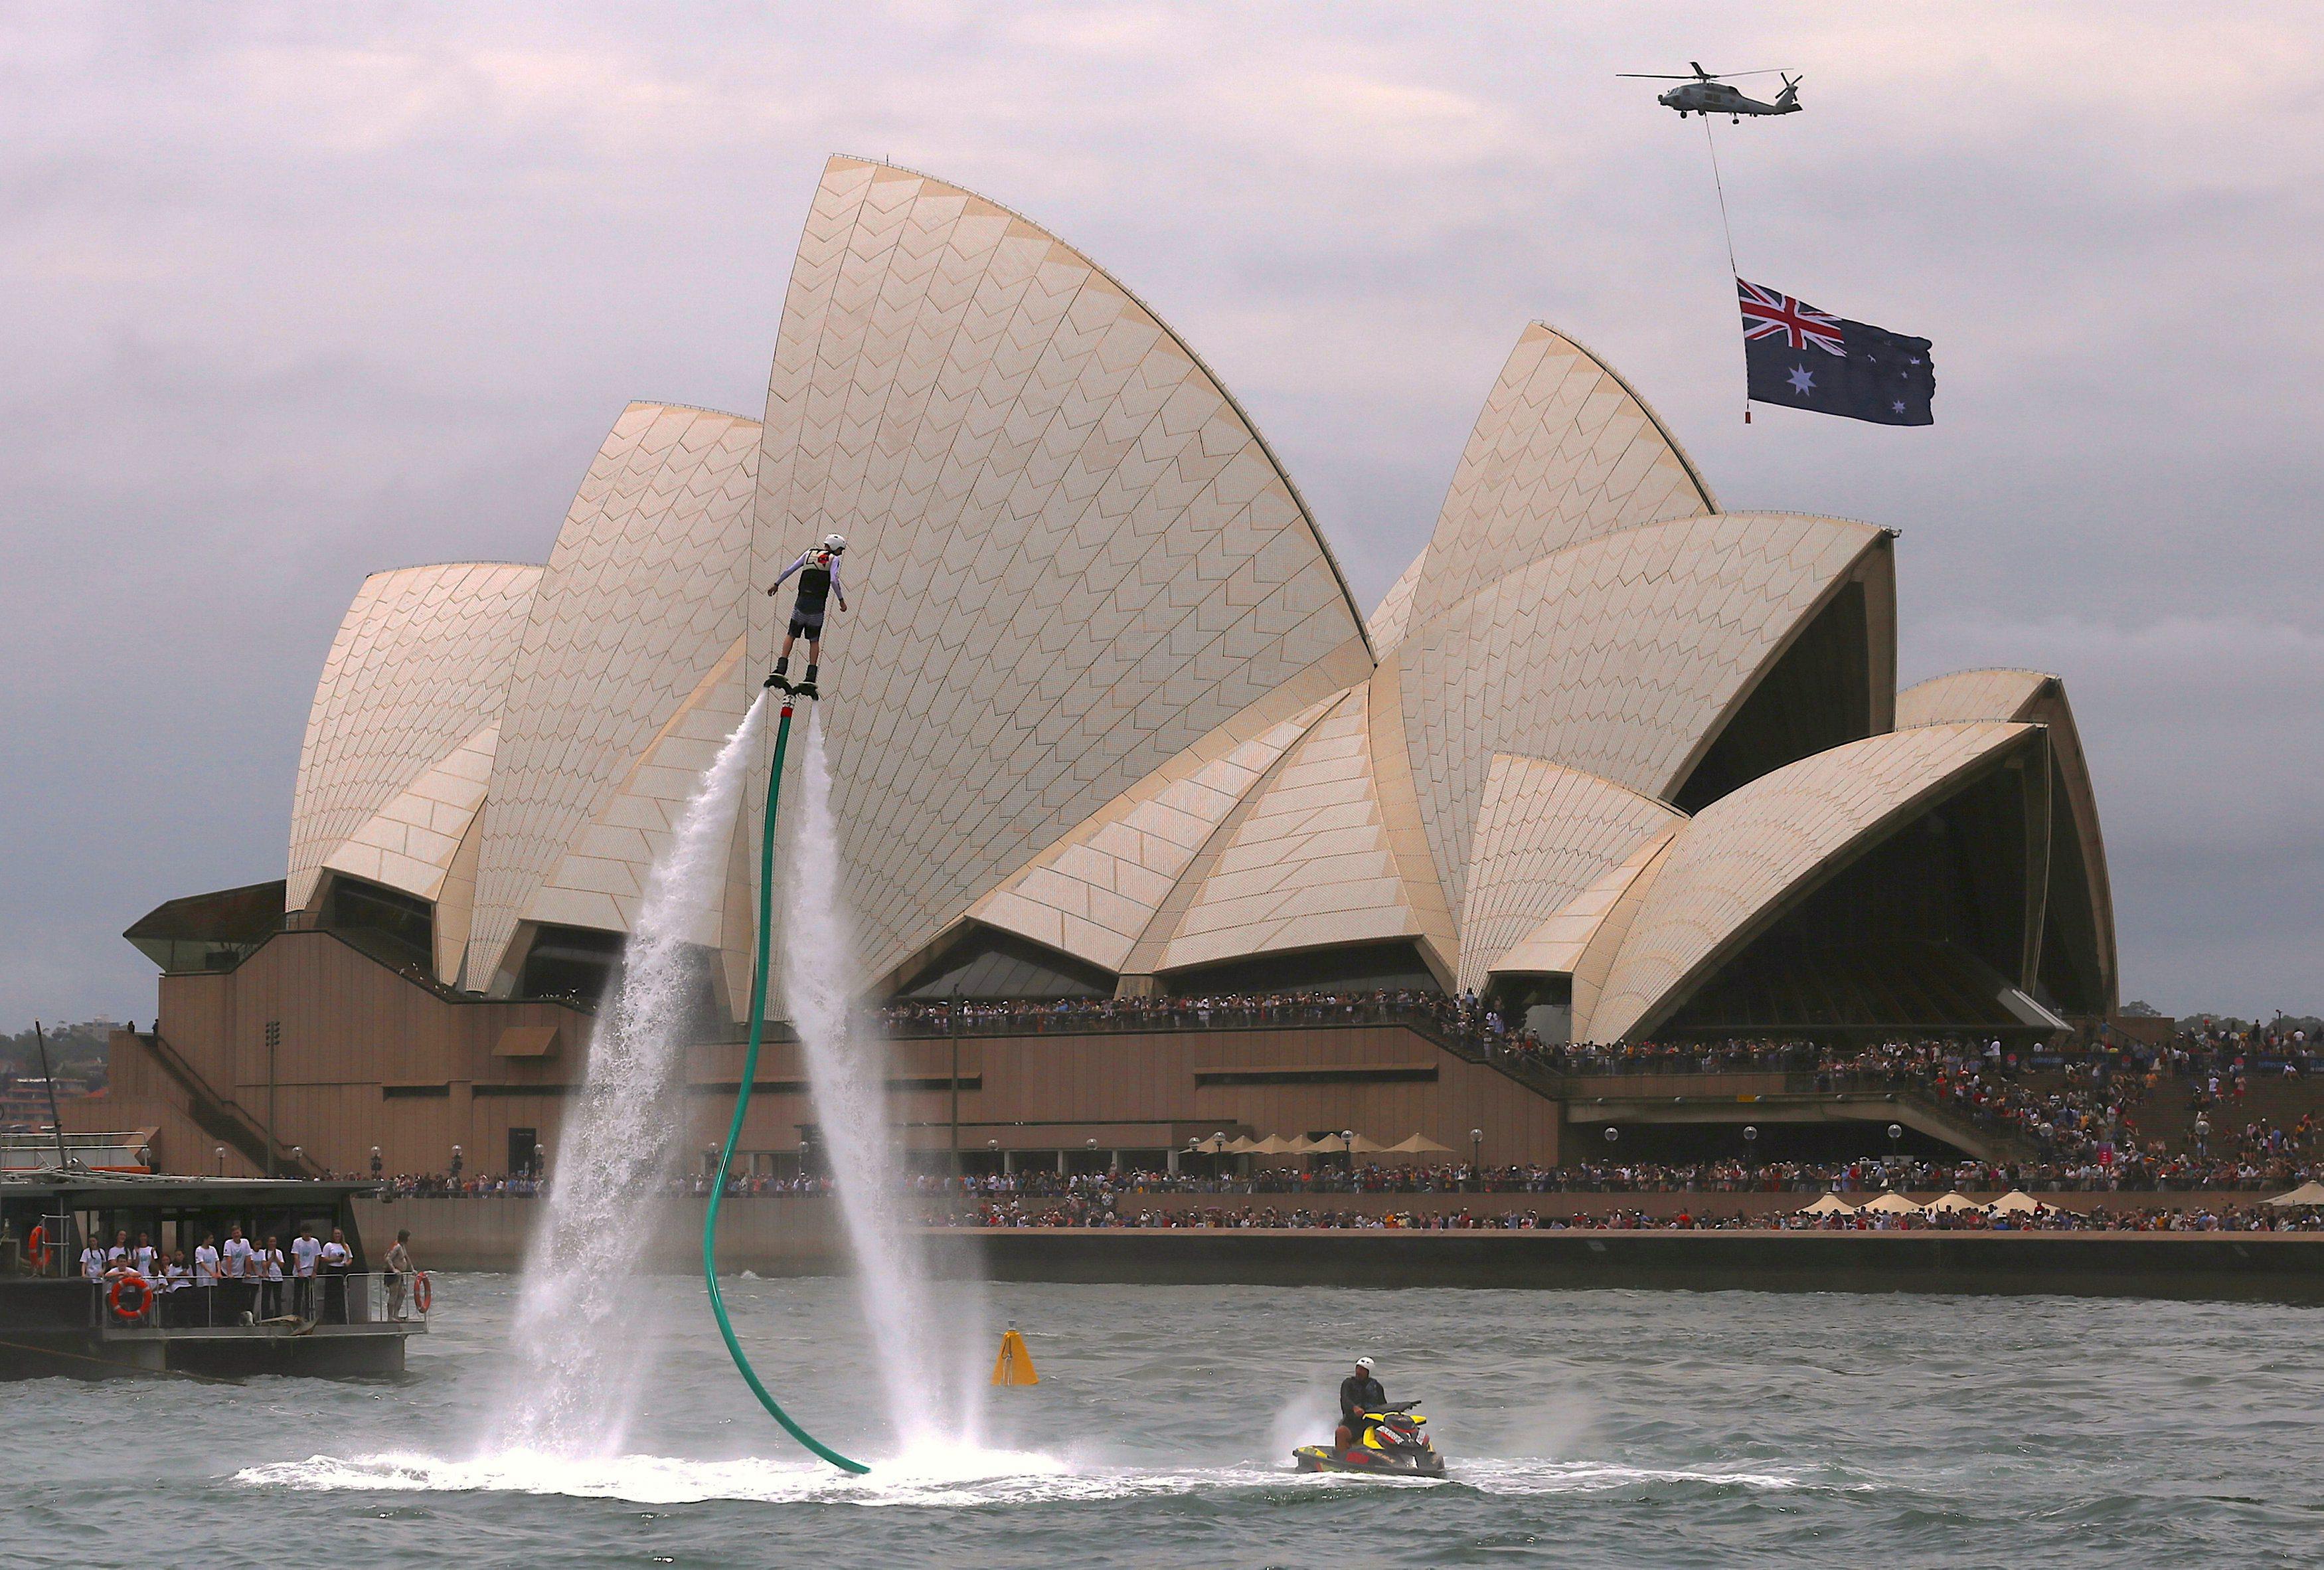 An Australian flag flies underneath a military helicopter past the Sydney Opera House as a performer